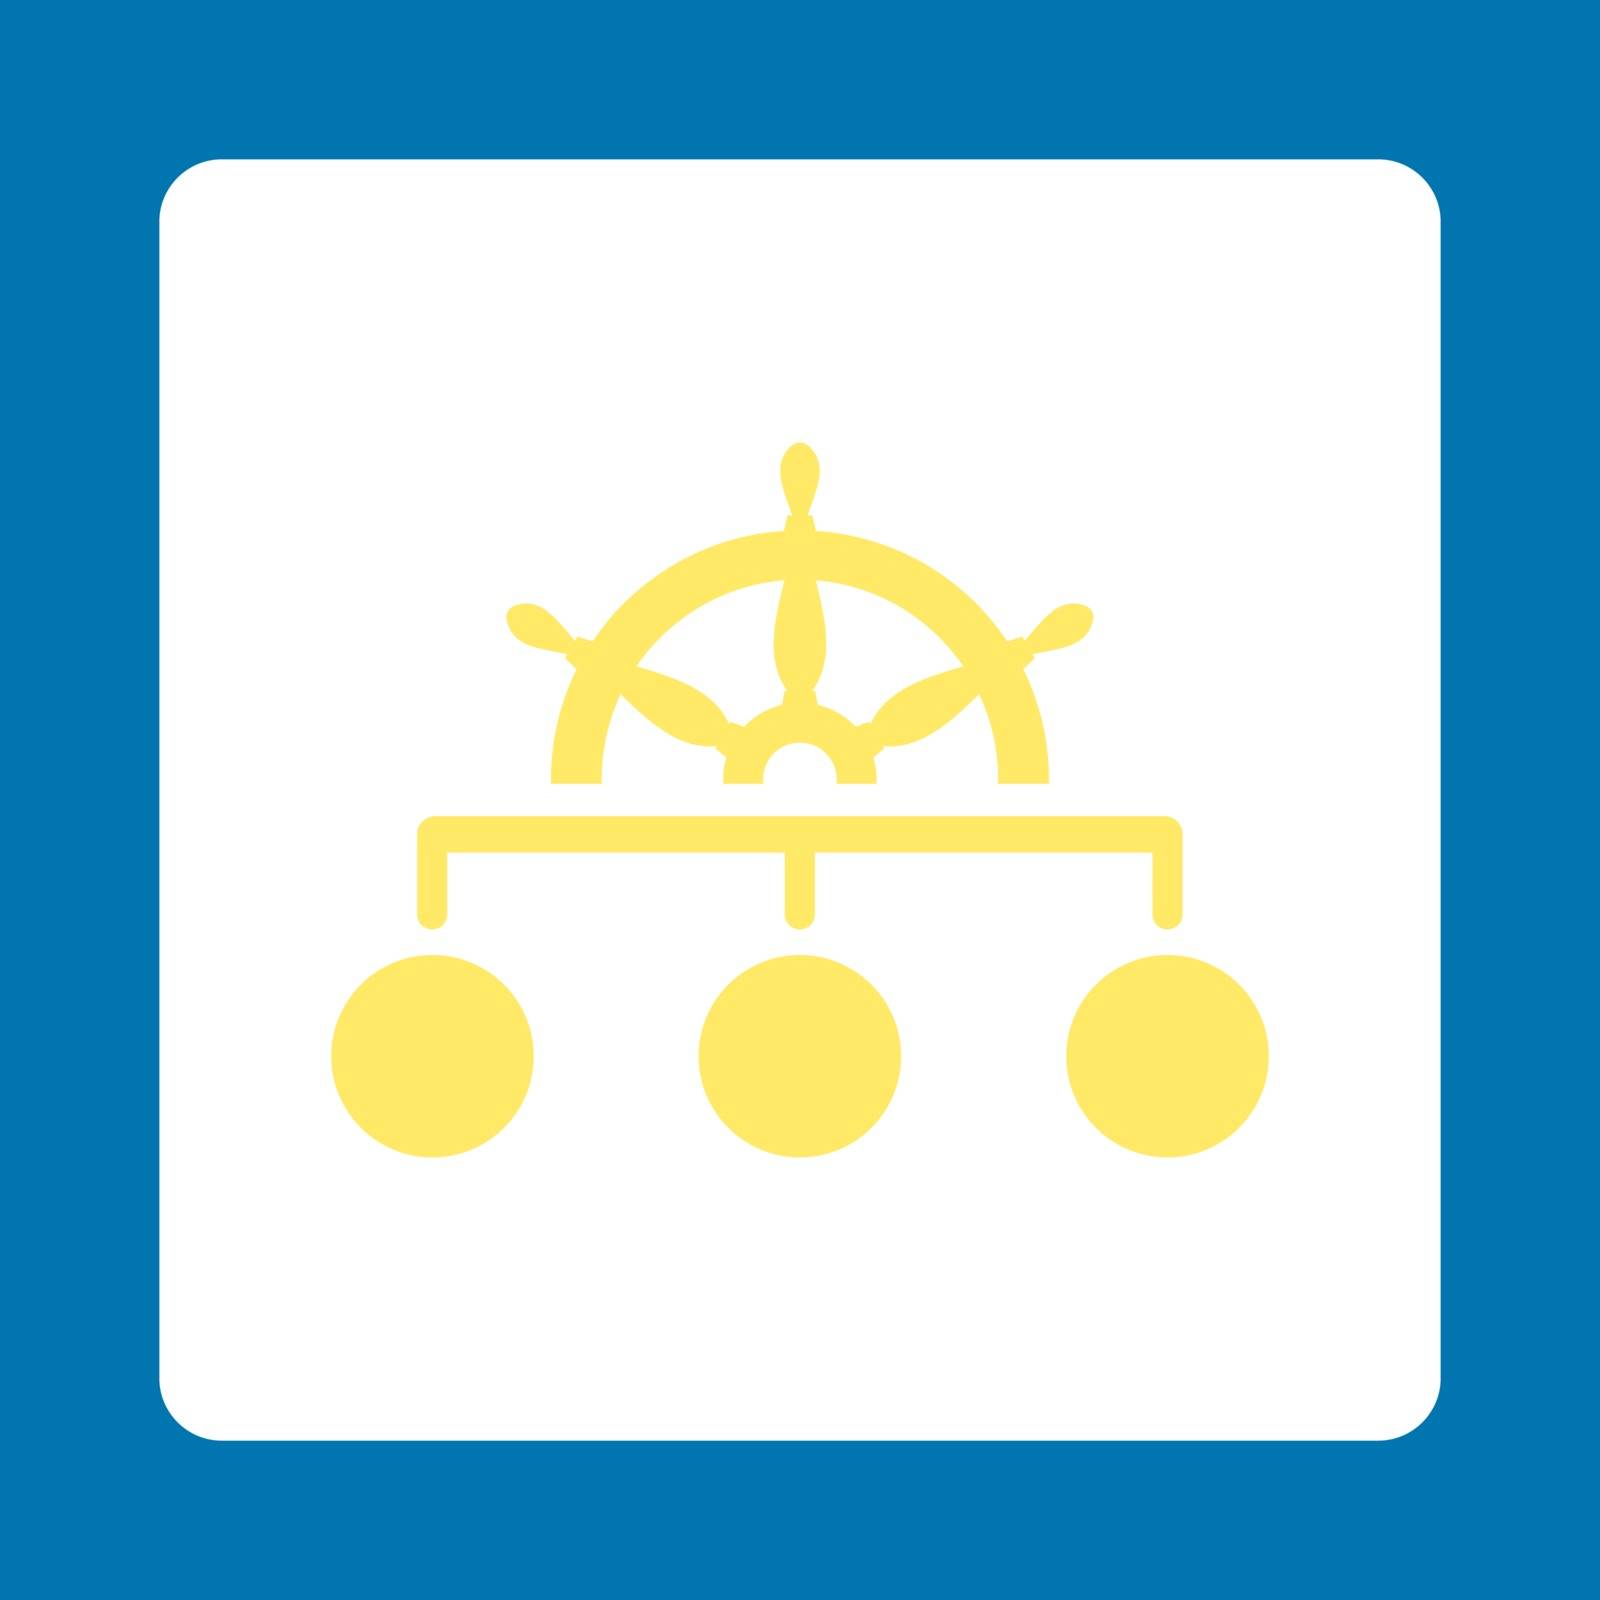 Rule icon. Vector style is yellow and white colors, flat rounded square button on a blue background.